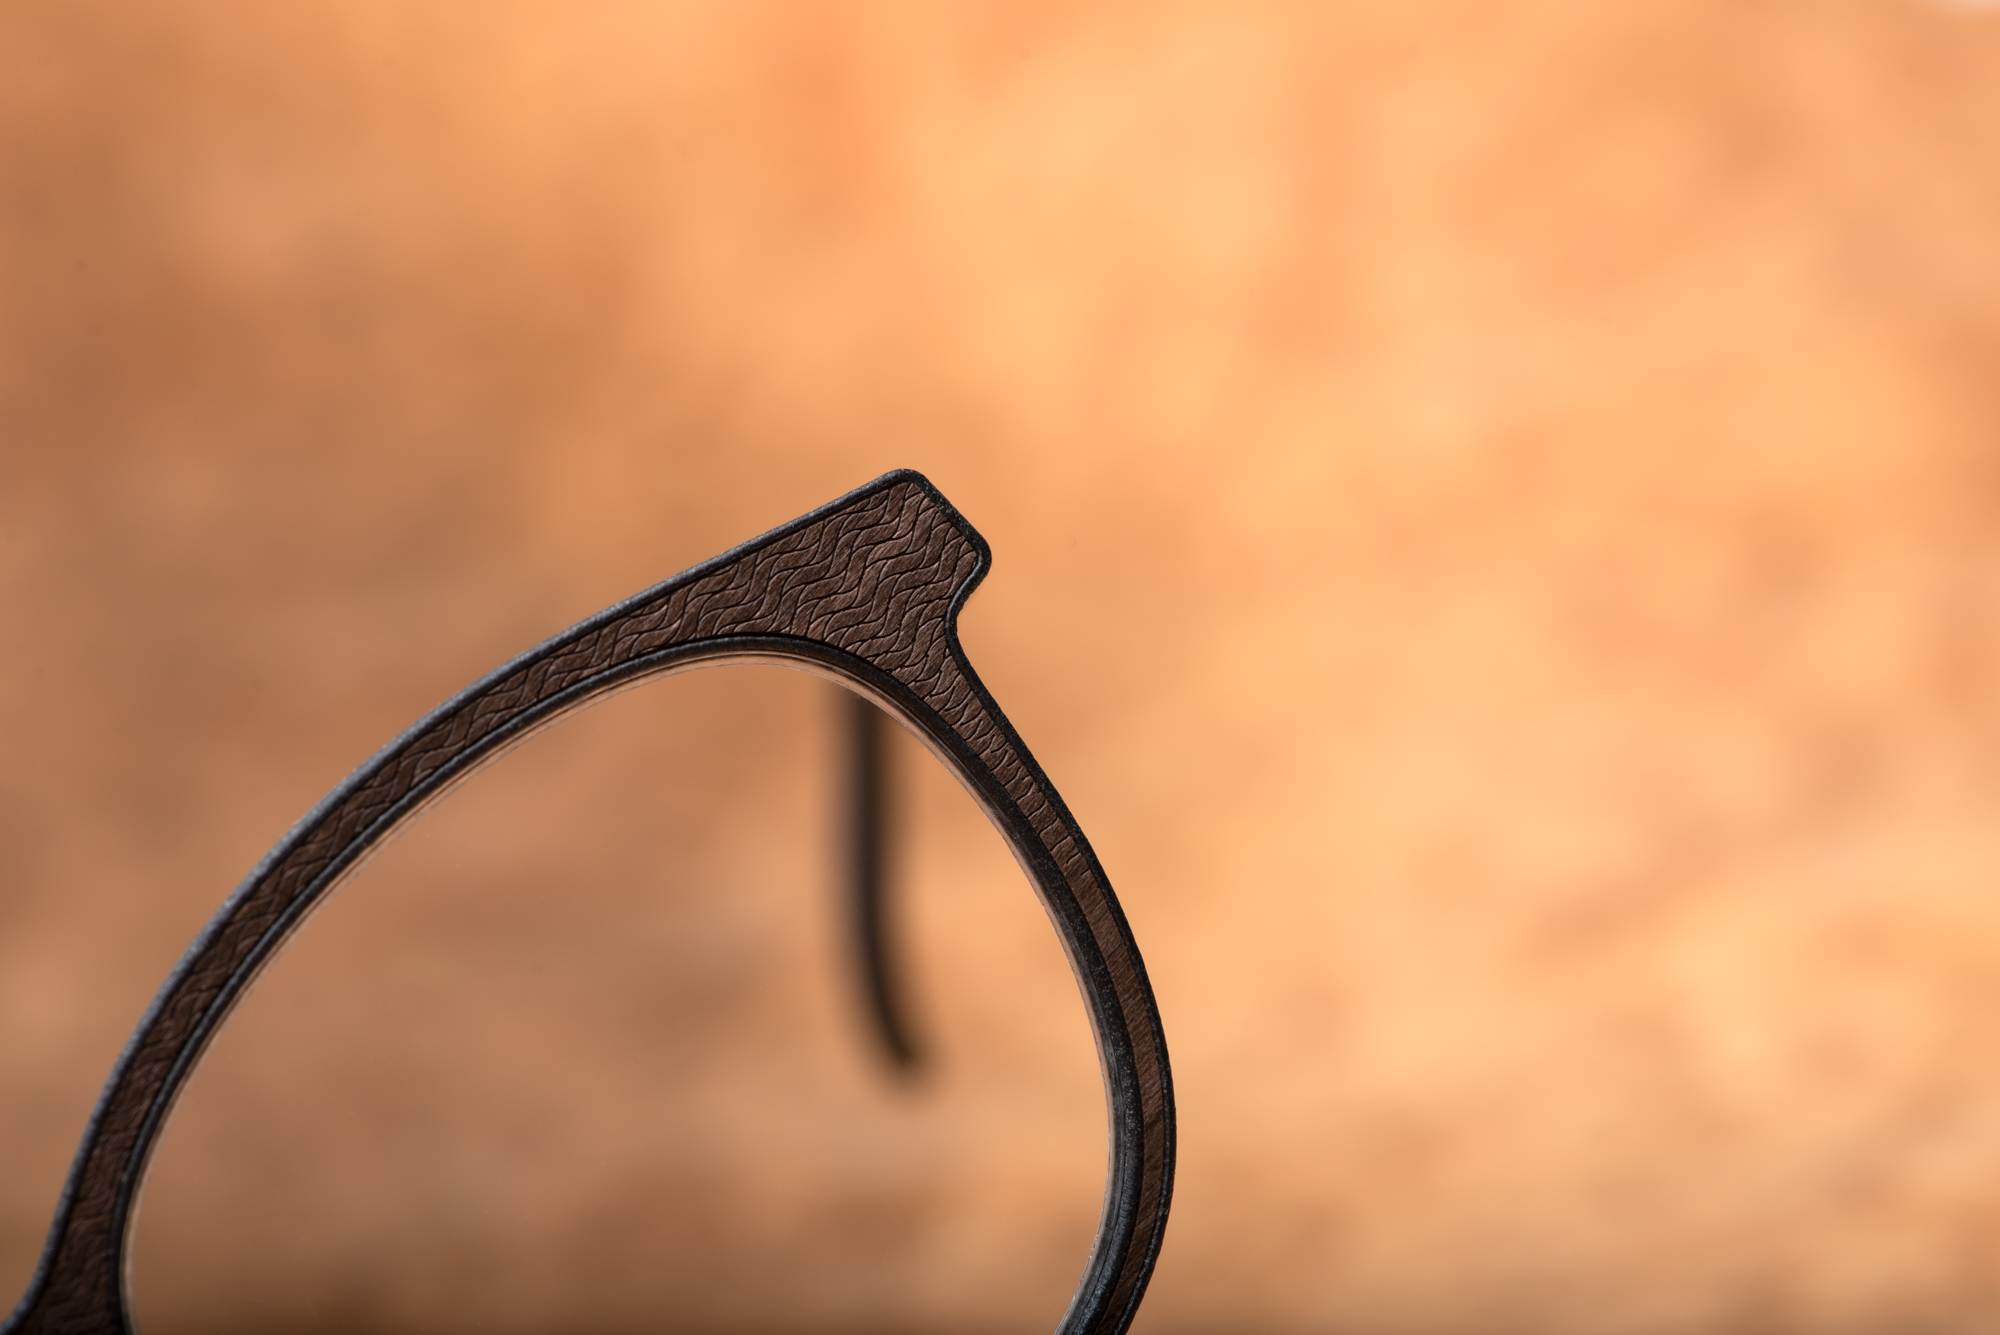 rolf eyewear plant based 3d printed wood inlay pattern FUSION collection ROSE detail02 rolf.